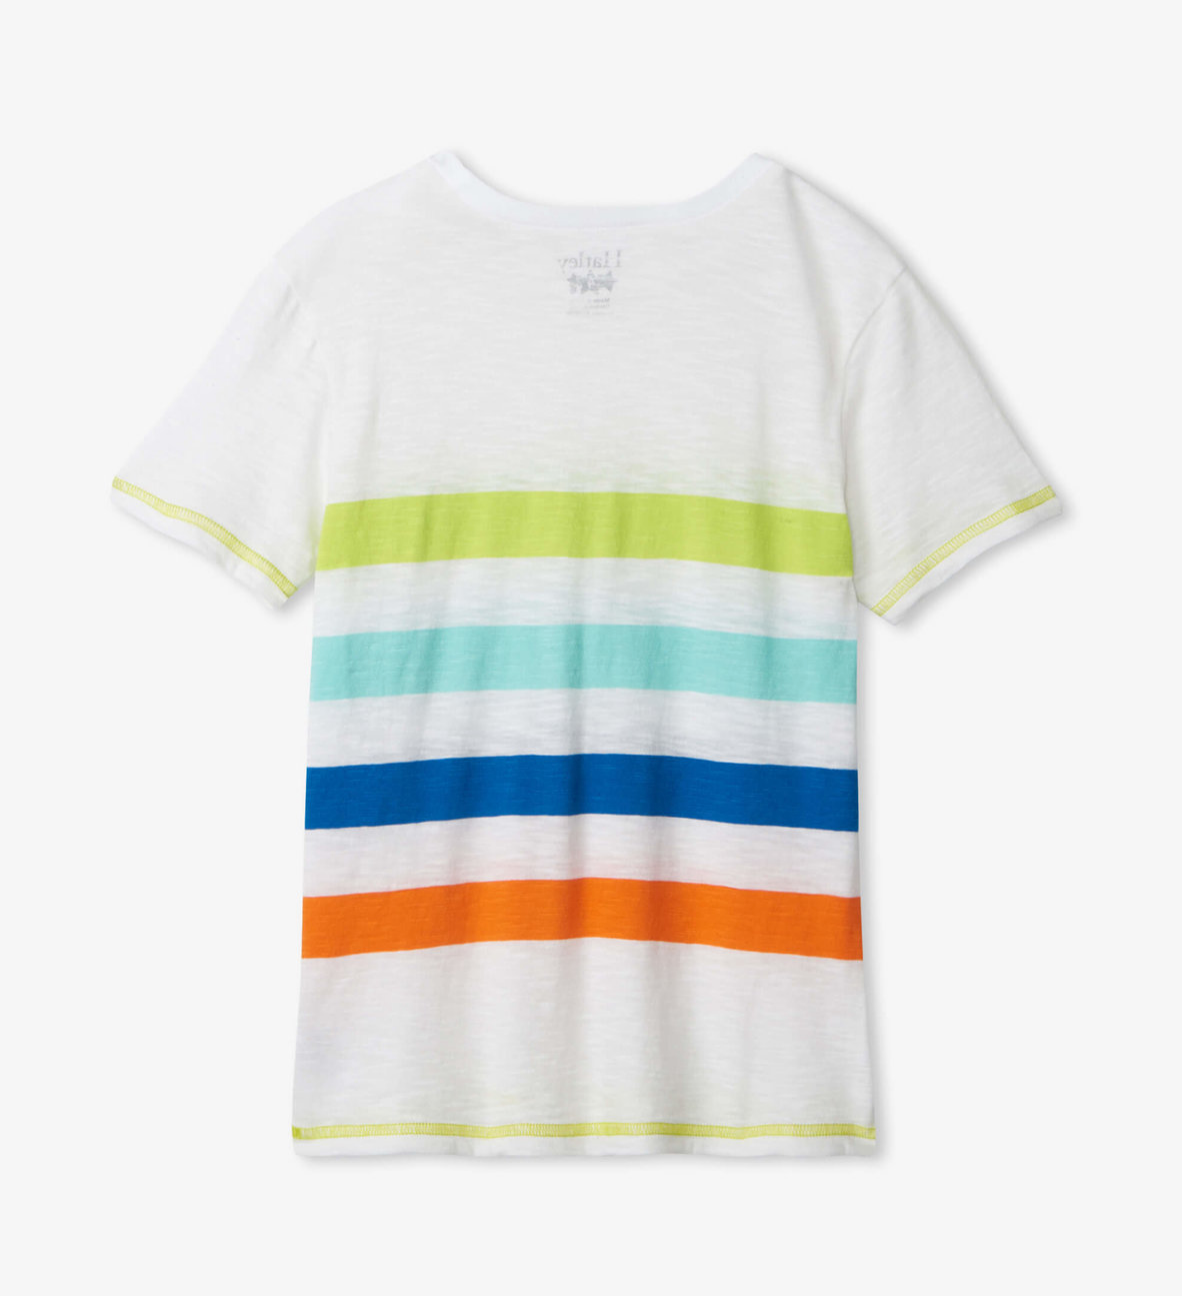 back of shirt with stripes on back - Hatley boys tee